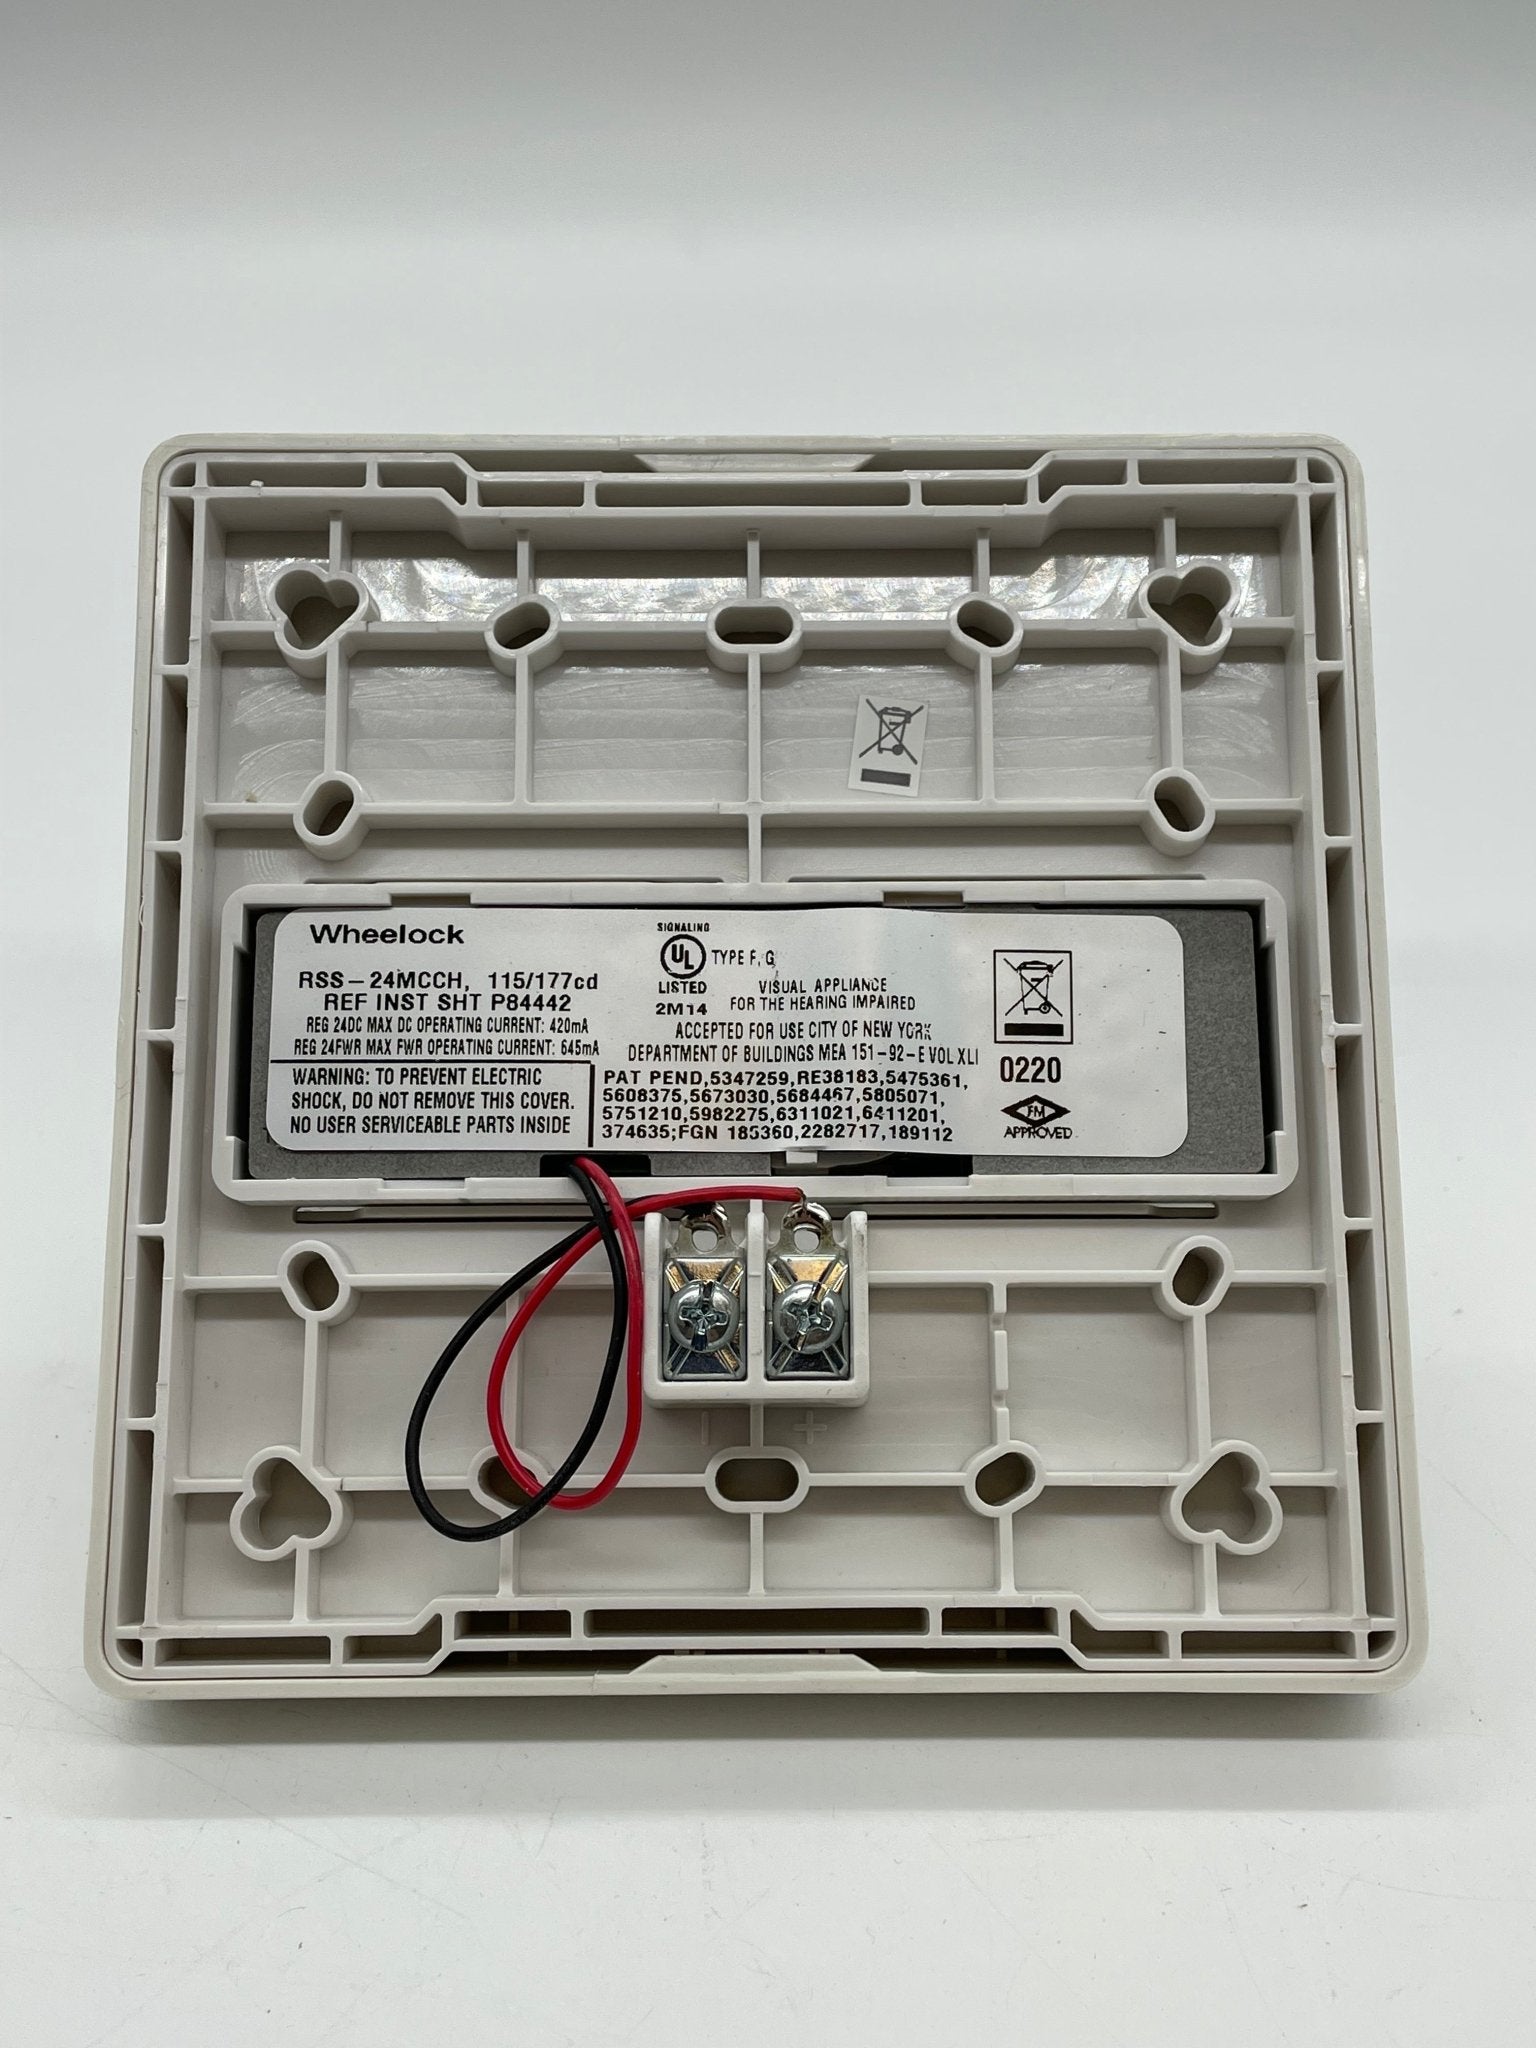 Wheelock RSS-24MCCH-FW - The Fire Alarm Supplier